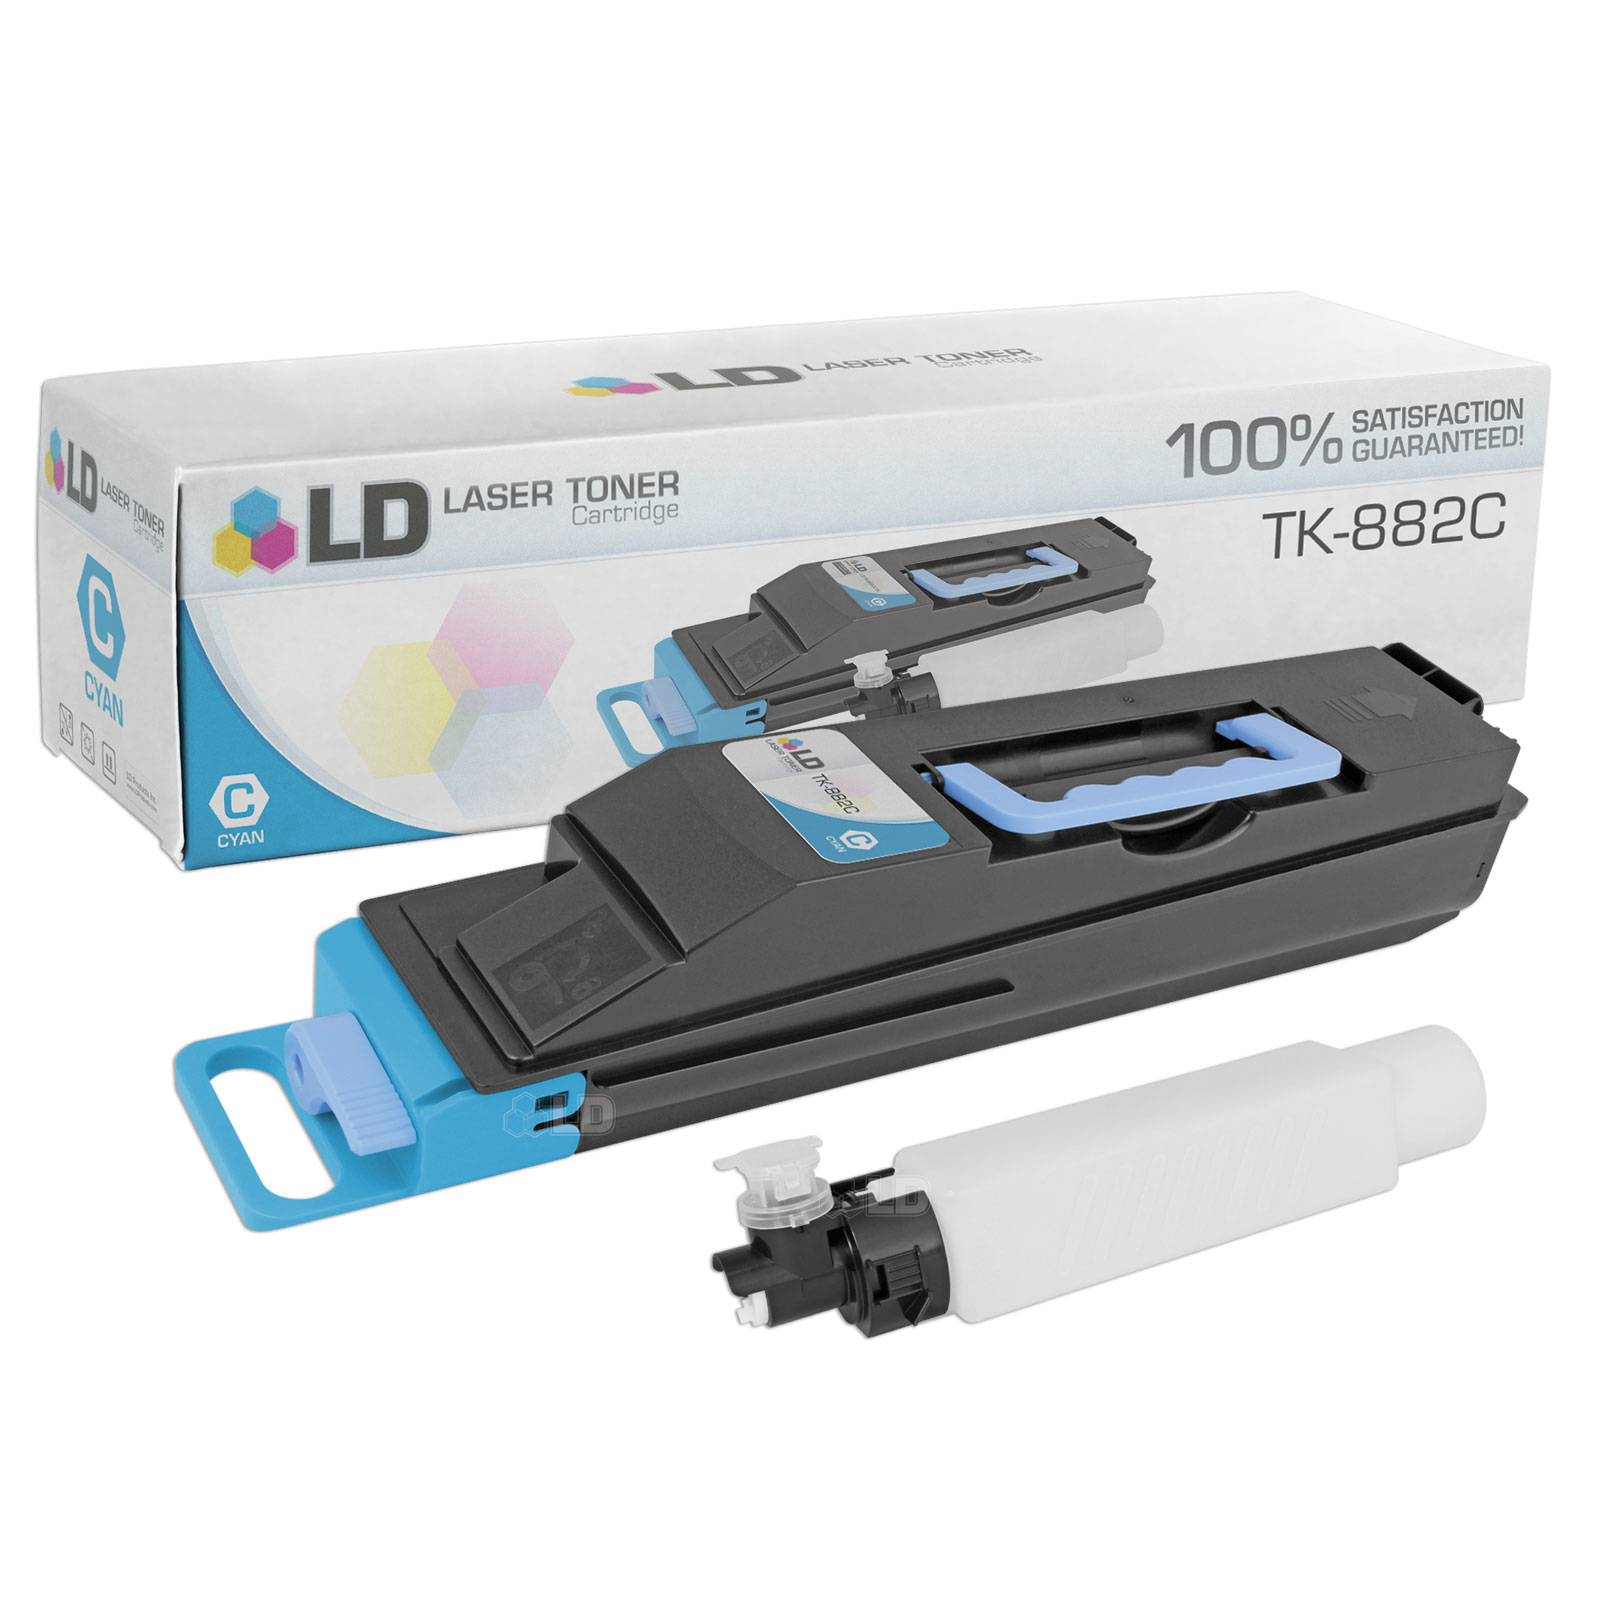 LD Compatible Replacement for Kyocera-Mita 1T02KACUS0 (TK-882C) Cyan Laser Toner Cartridge for use in Kyocera-Mita FS-C8500DN - image 1 of 1